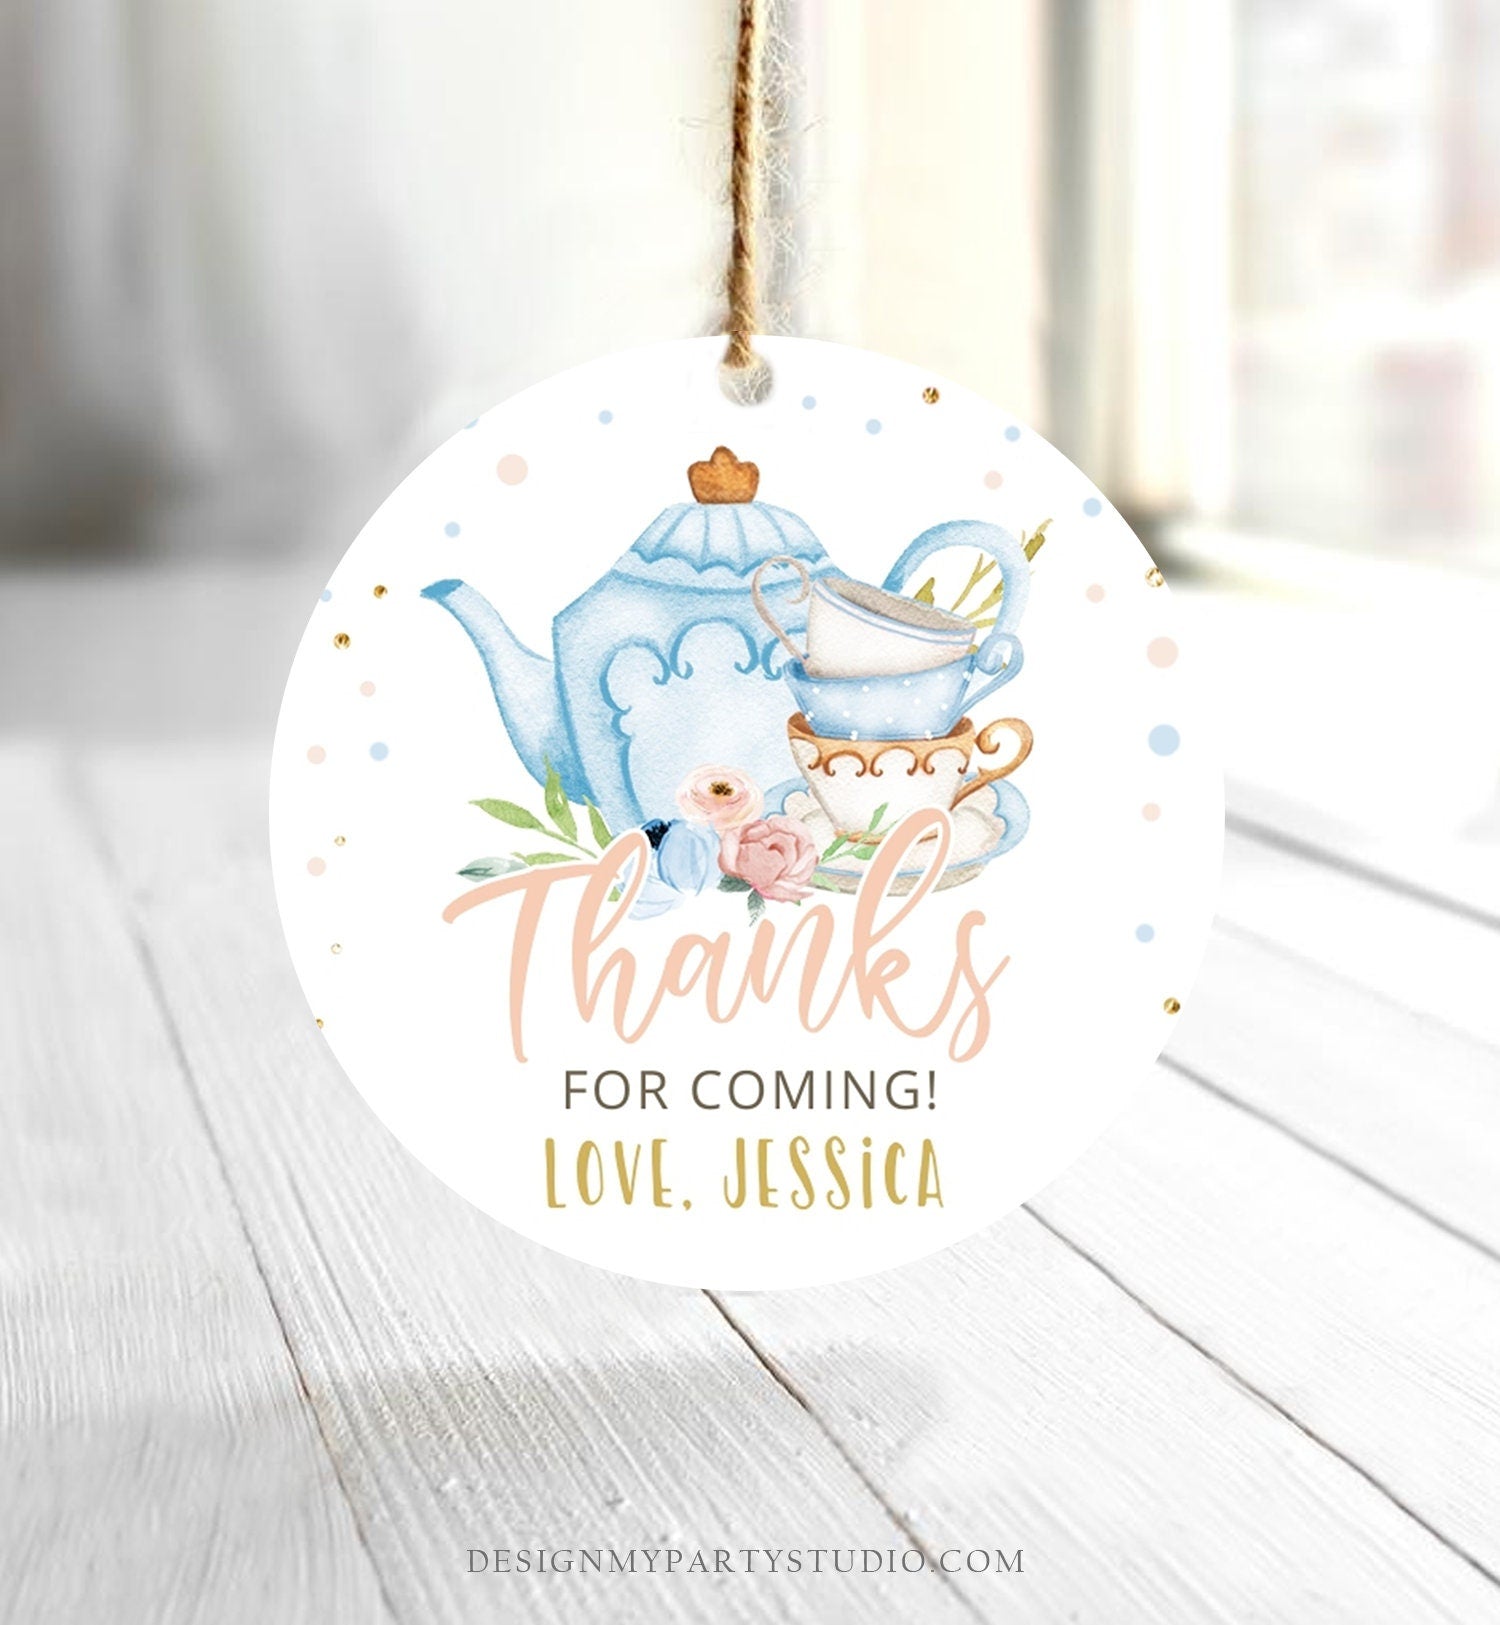 Editable Tea Party Favor Tag Sticker Baby Shower Baby is Brewing Floral Blue Gold Whimsical Girl Square Round Template Corjl Printable 0349